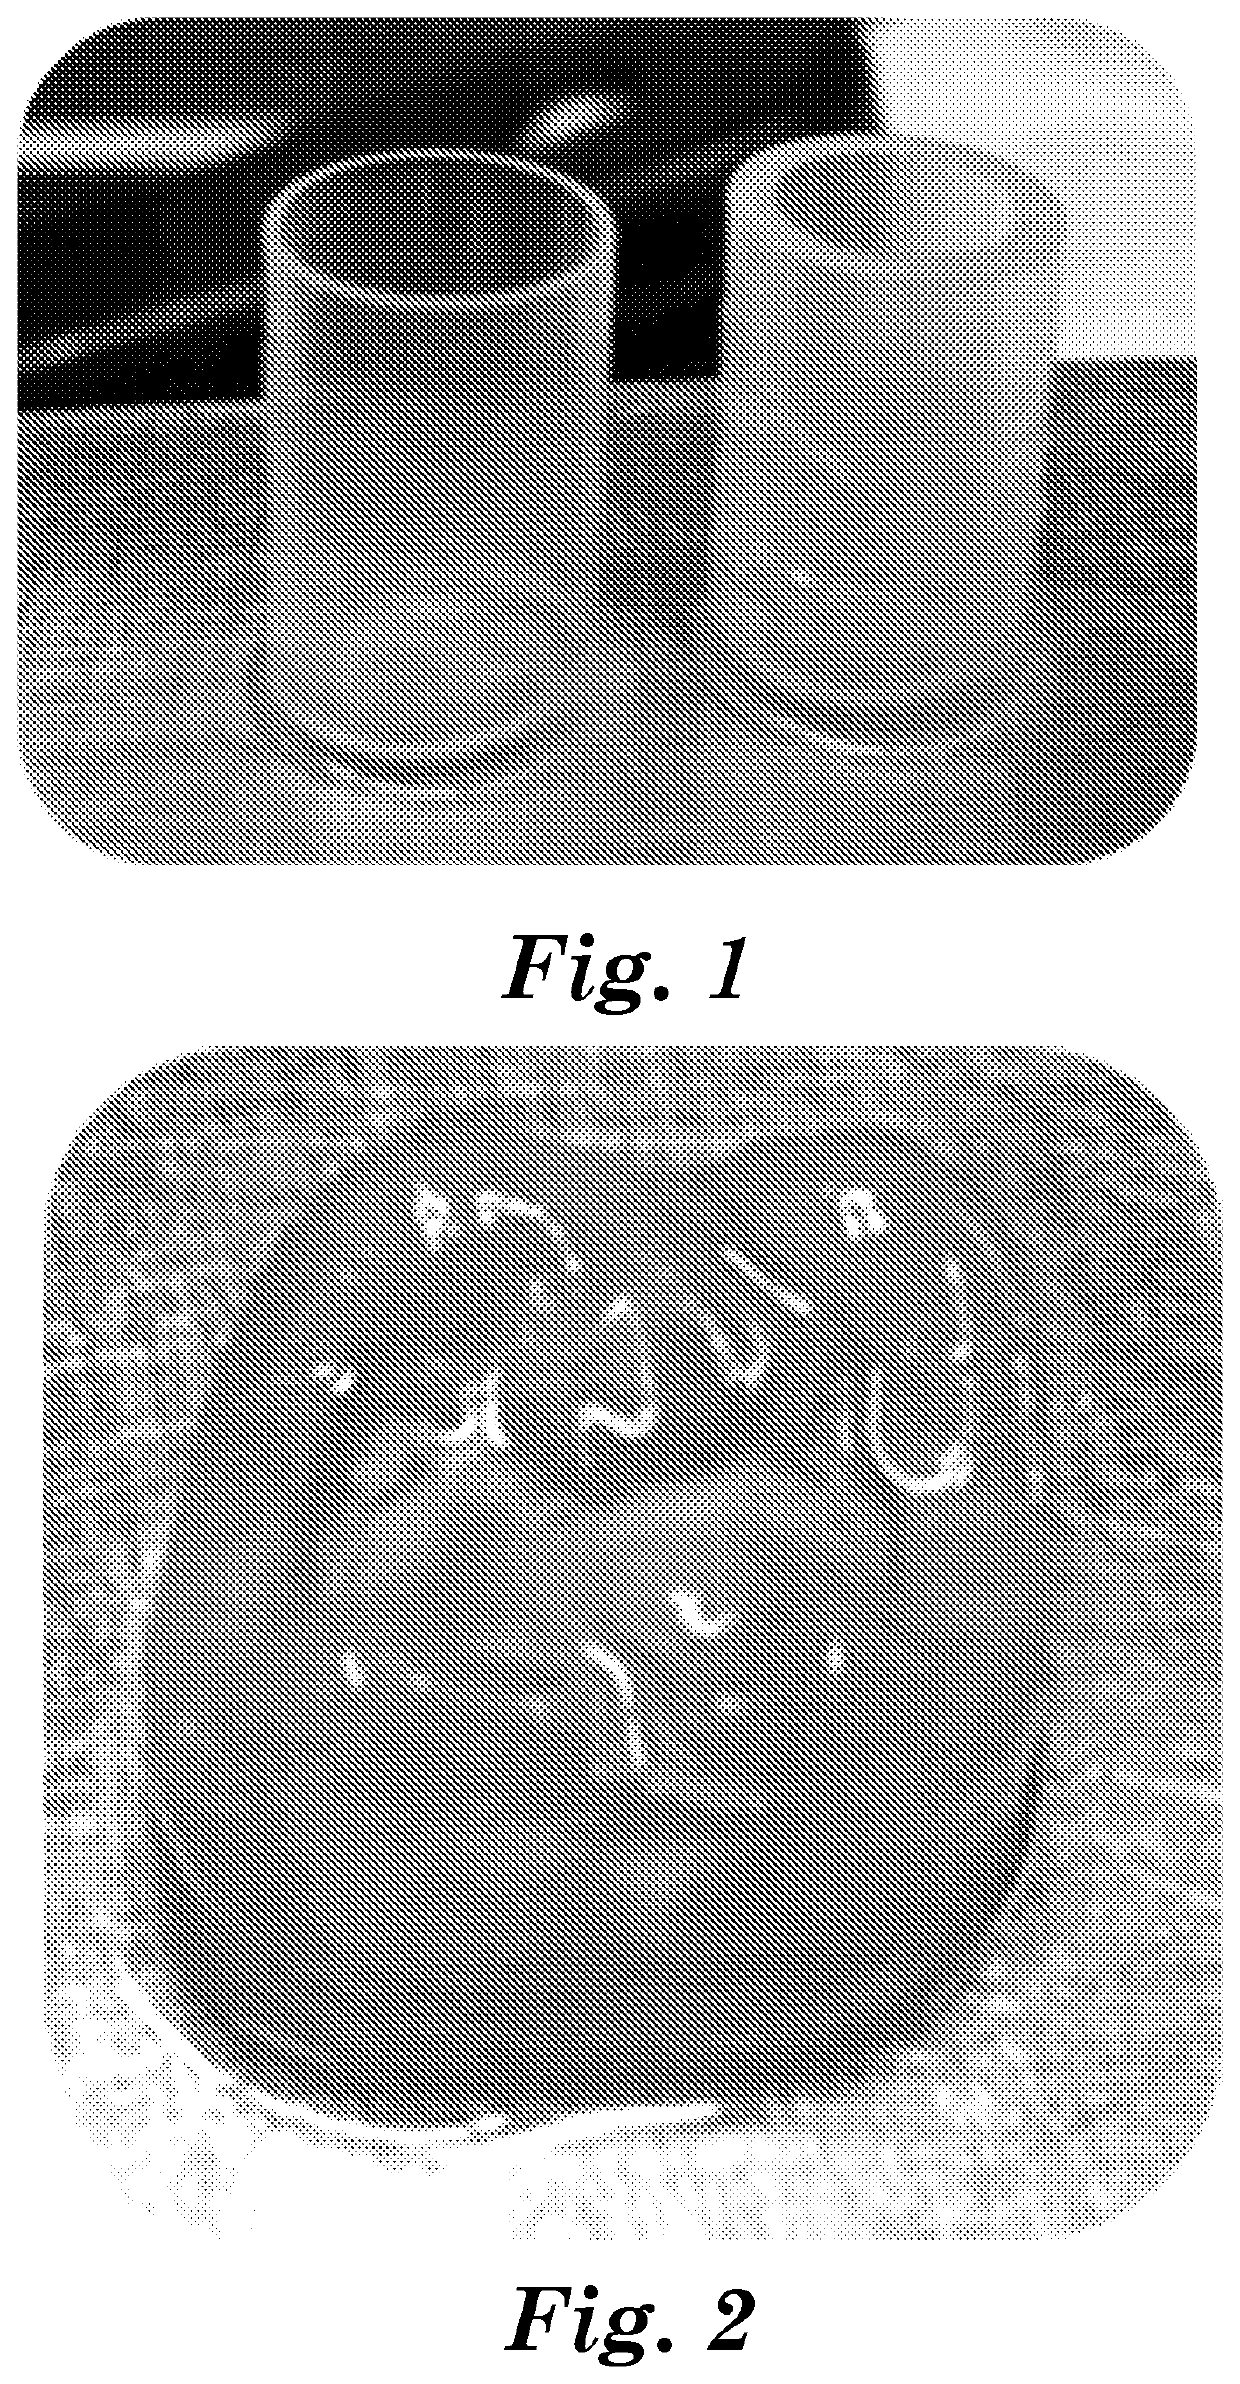 Sol containing nano zirconia particles for use in additive manufacturing processes for the production of 3-dimensional articles